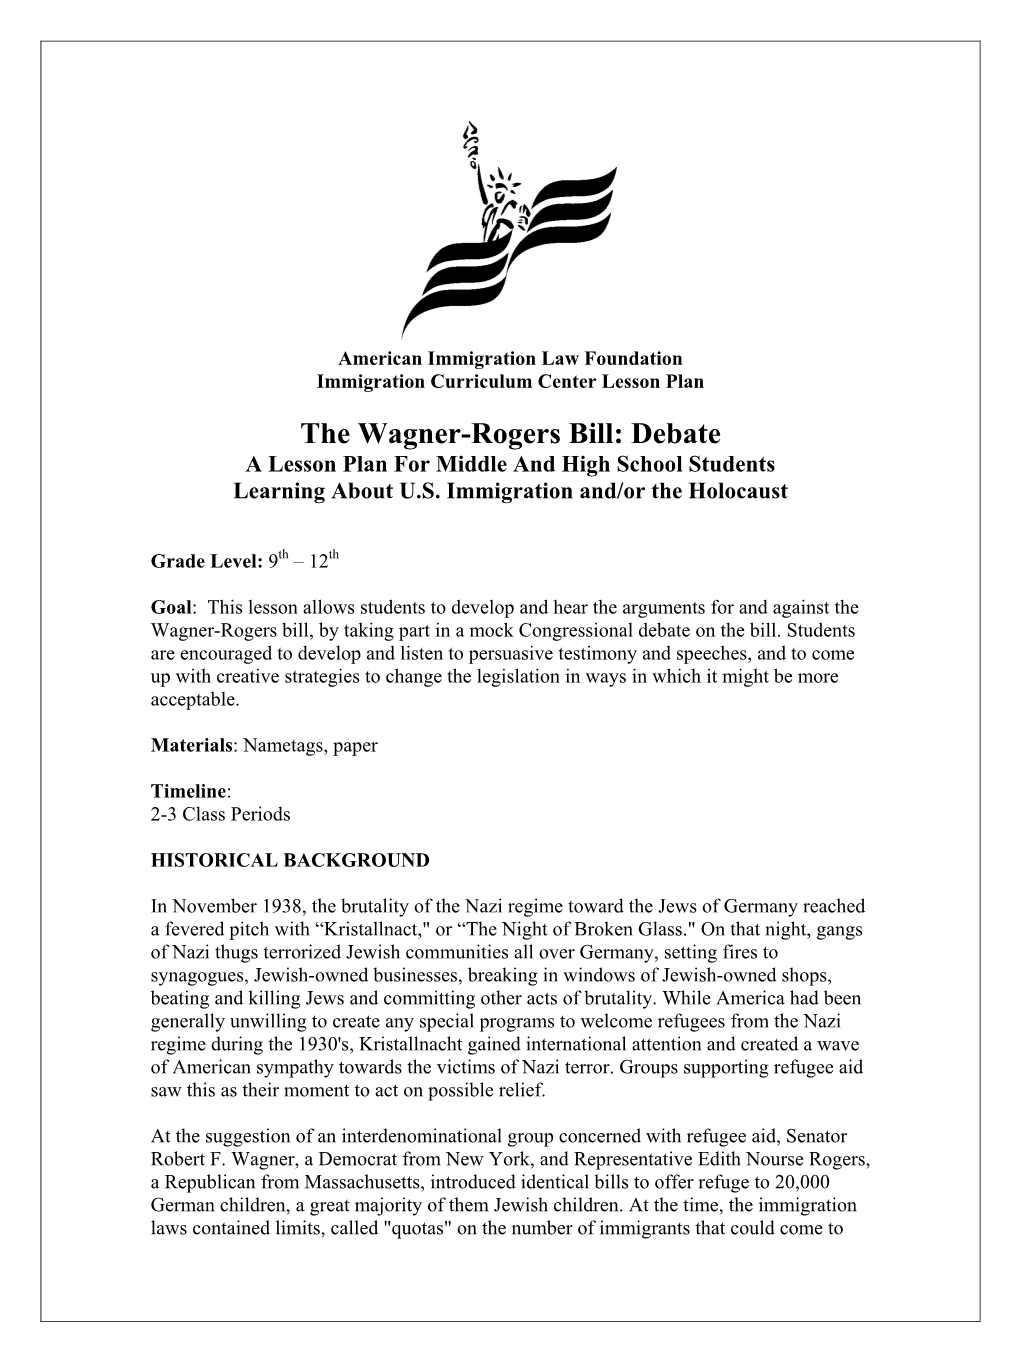 The Wagner-Rogers Bill: Debate a Lesson Plan for Middle and High School Students Learning About U.S